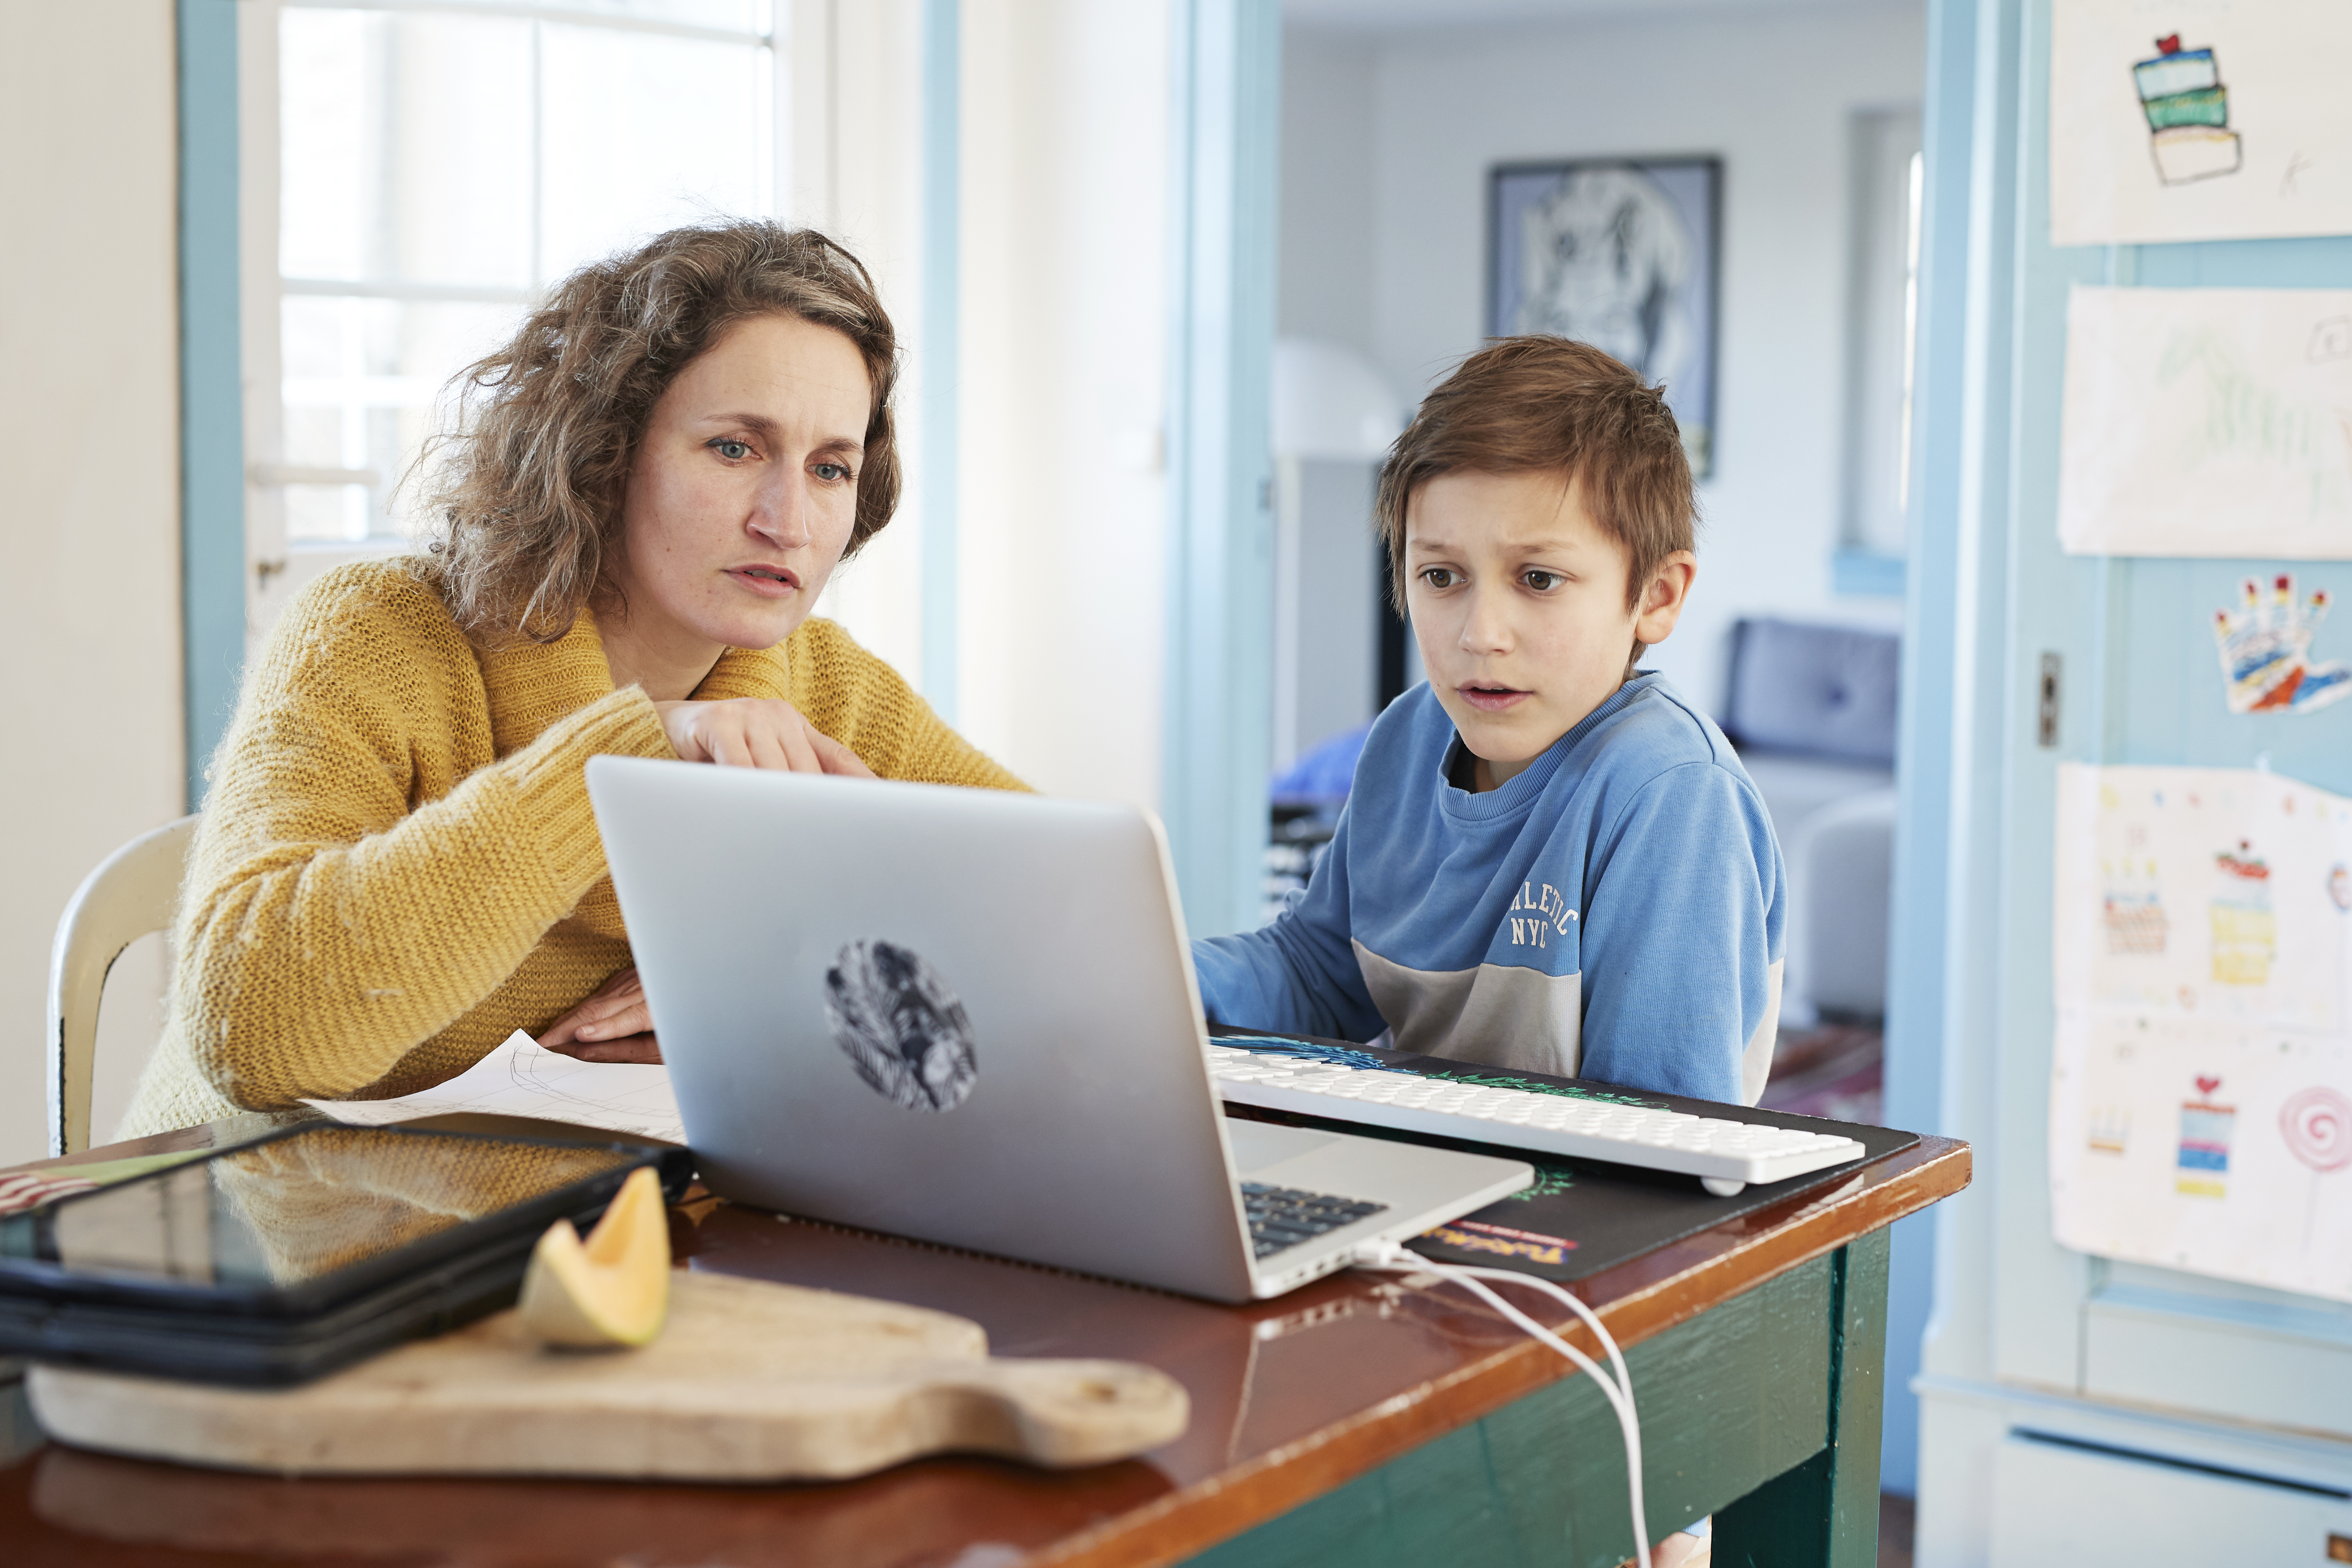 A mother helps her son with school work on a laptop computer.